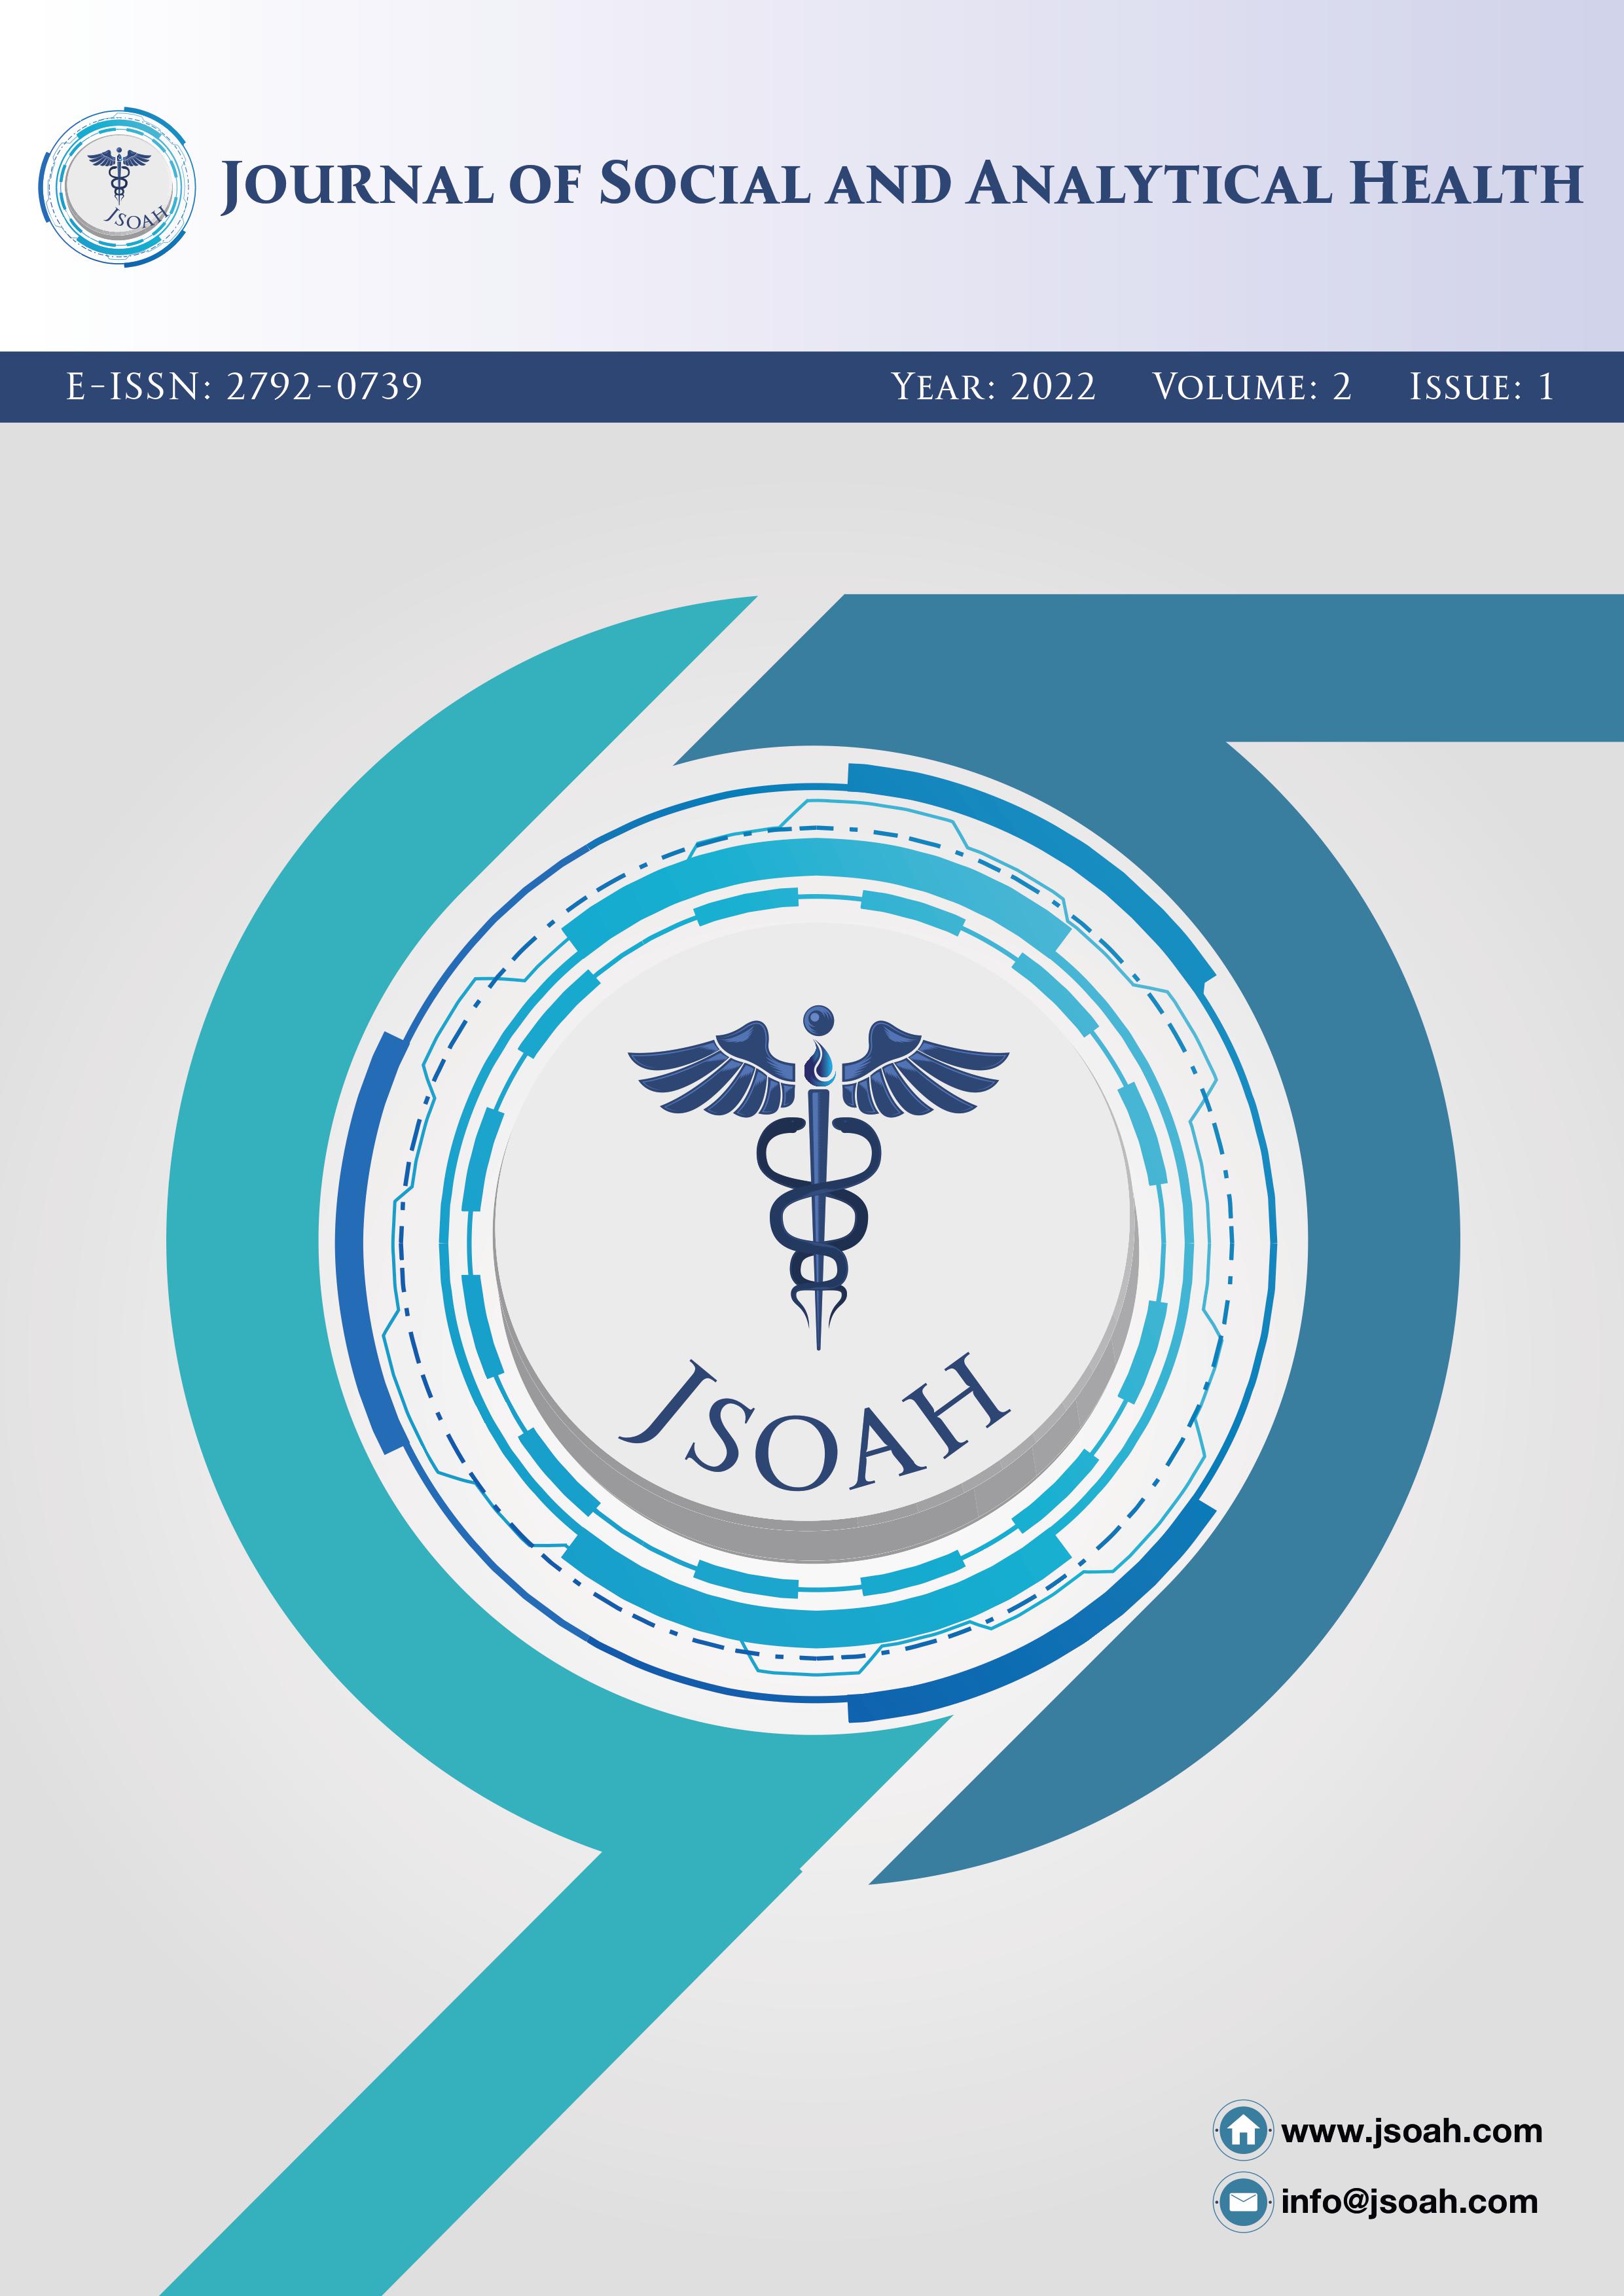 					View Vol. 2 No. 1 (2022): JOURNAL OF SOCIAL AND ANALYTICAL HEALTH
				